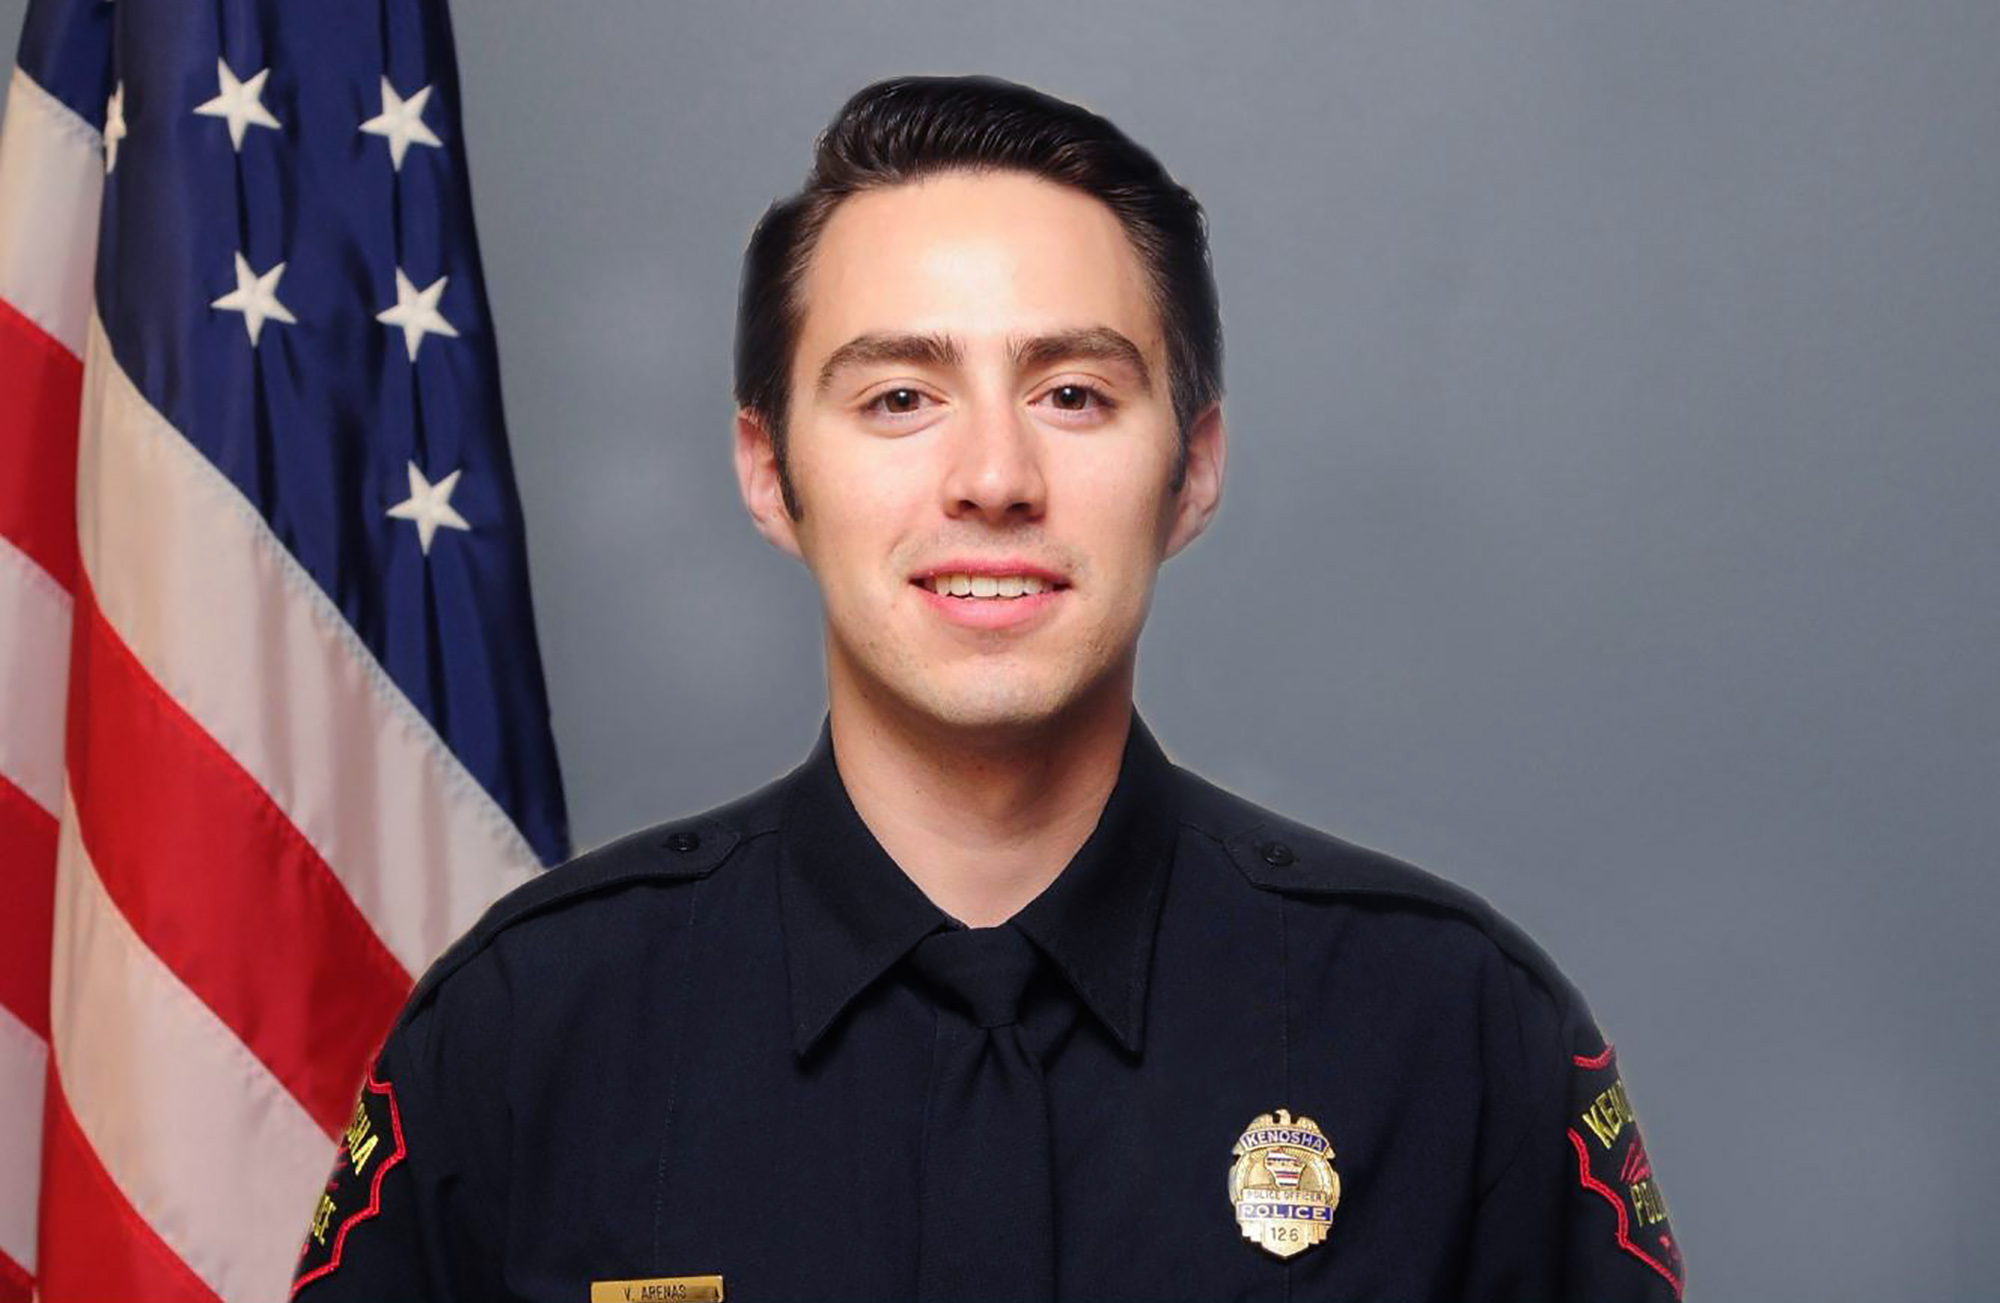 PHOTO: Kenosha Police Officer Vincent Arenas has been identified as one of the Wisconsin officers who deployed a taser at Jacob Blake before Blake was shot on Aug. 23, 2020.